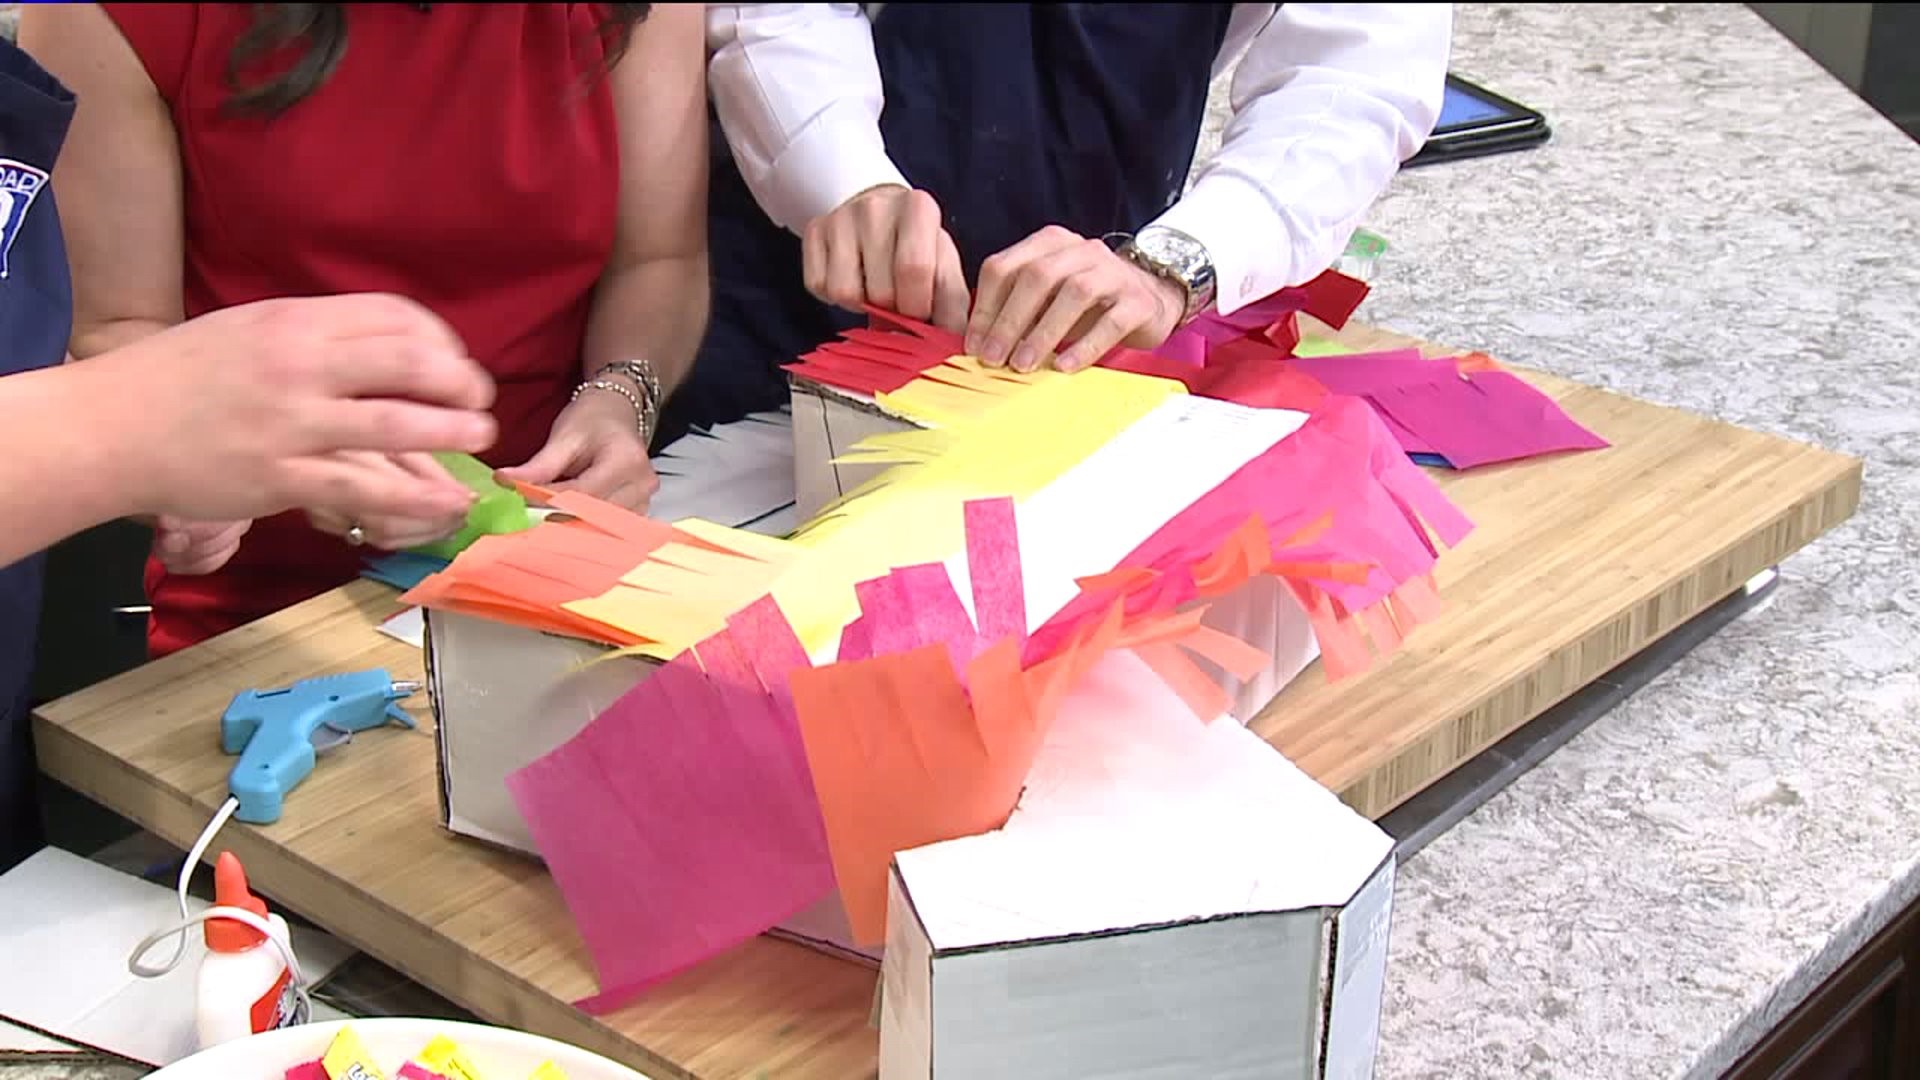 Nailed It Or Failed It: How To Make Your Own Pinata